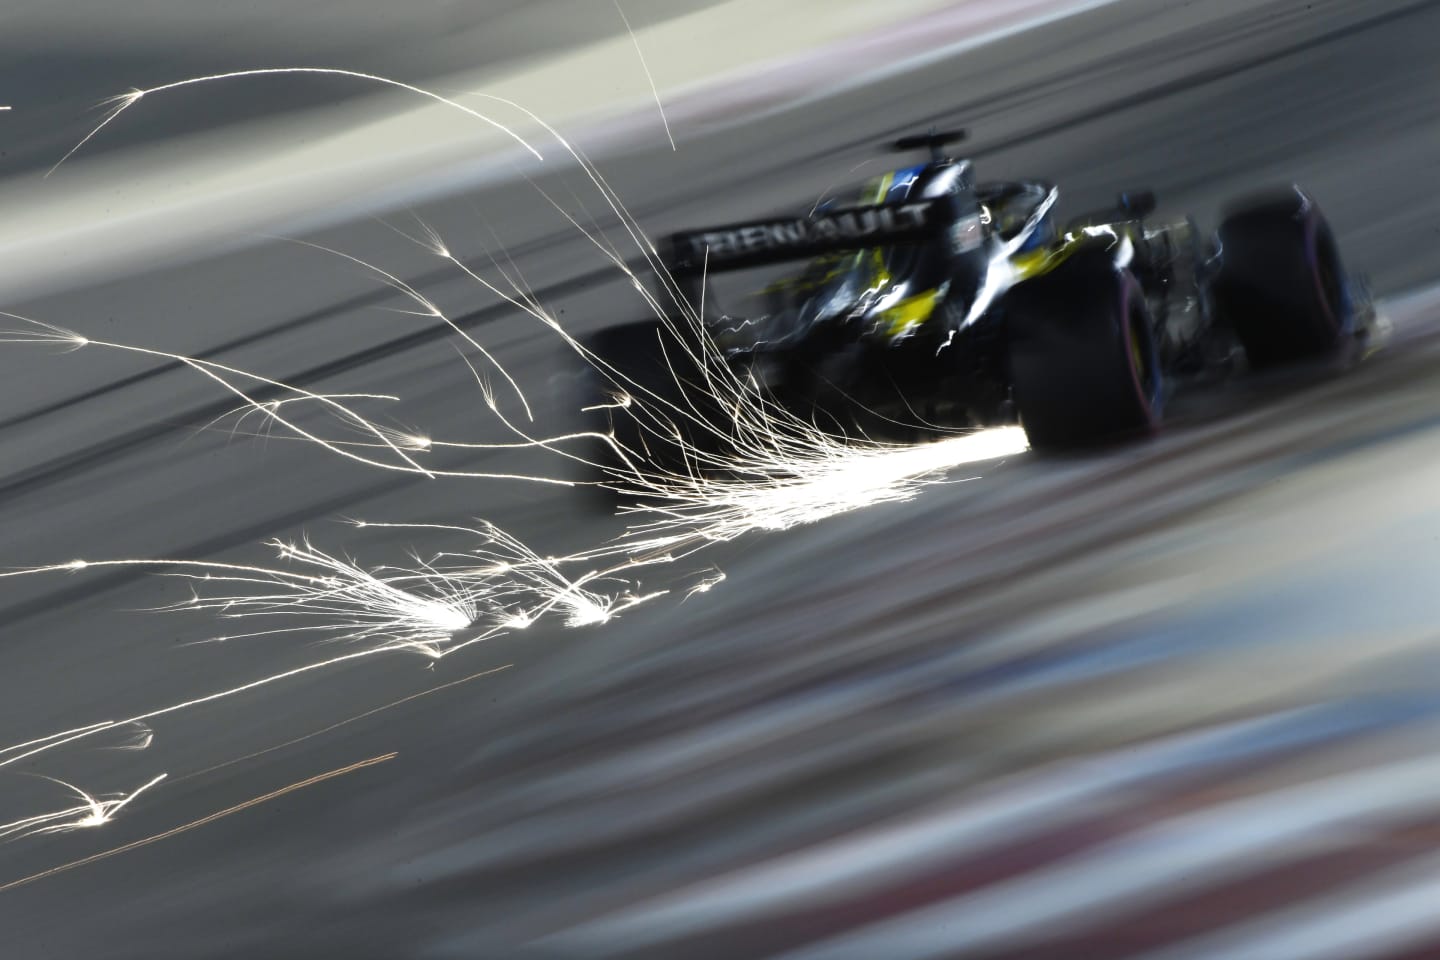 BAHRAIN, BAHRAIN - DECEMBER 05: Sparks fly behind Daniel Ricciardo of Australia driving the (3) Renault Sport Formula One Team RS20 during qualifying ahead of the F1 Grand Prix of Sakhir at Bahrain International Circuit on December 05, 2020 in Bahrain, Bahrain. (Photo by Rudy Carezzevoli/Getty Images)